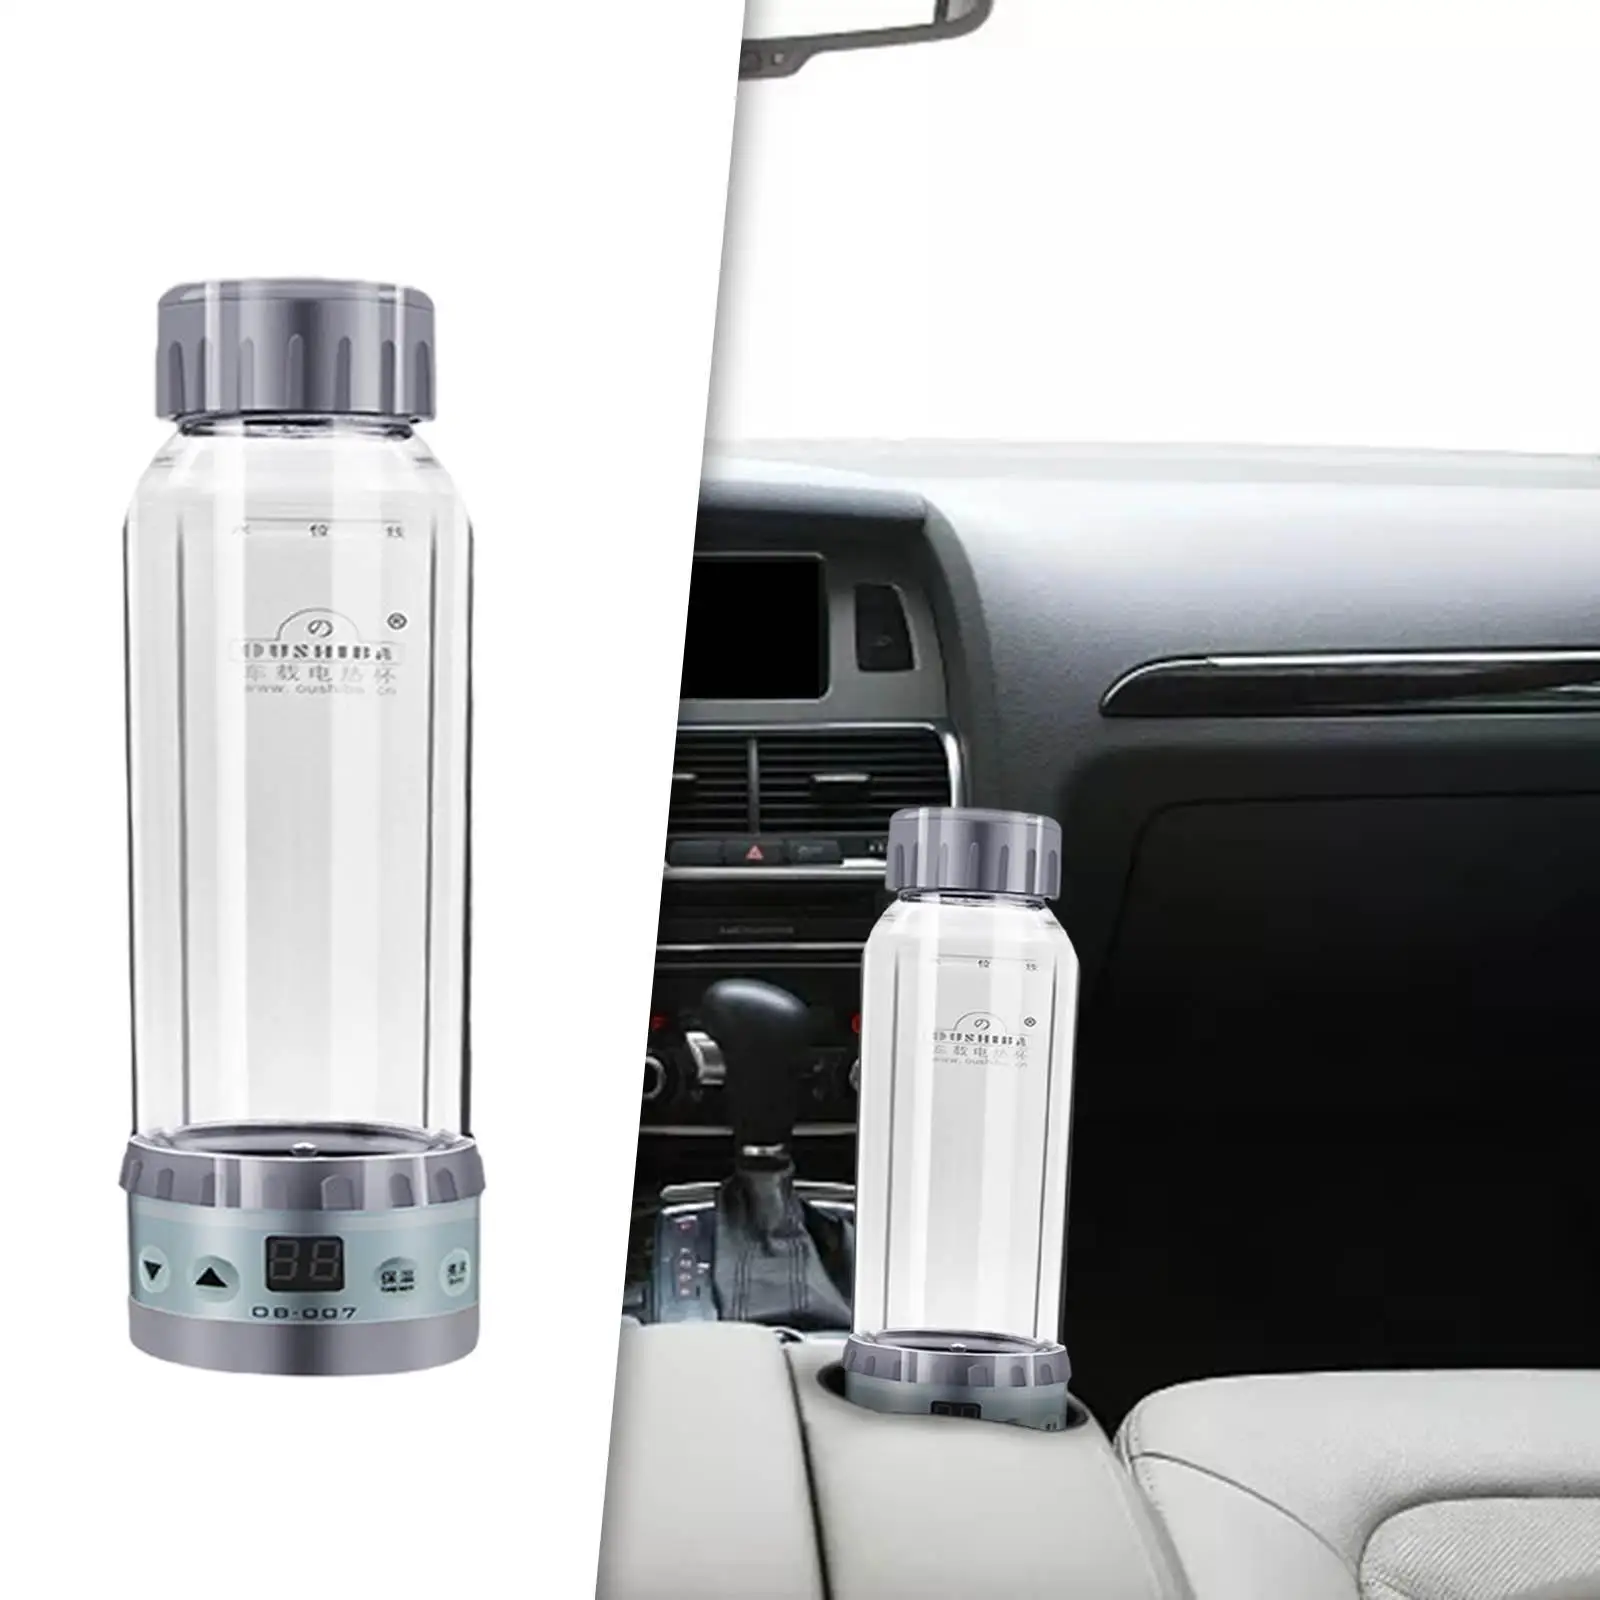 Car Kettle Boiler Portable Double Layer Hot Water Kettle Mug Fit for Tea